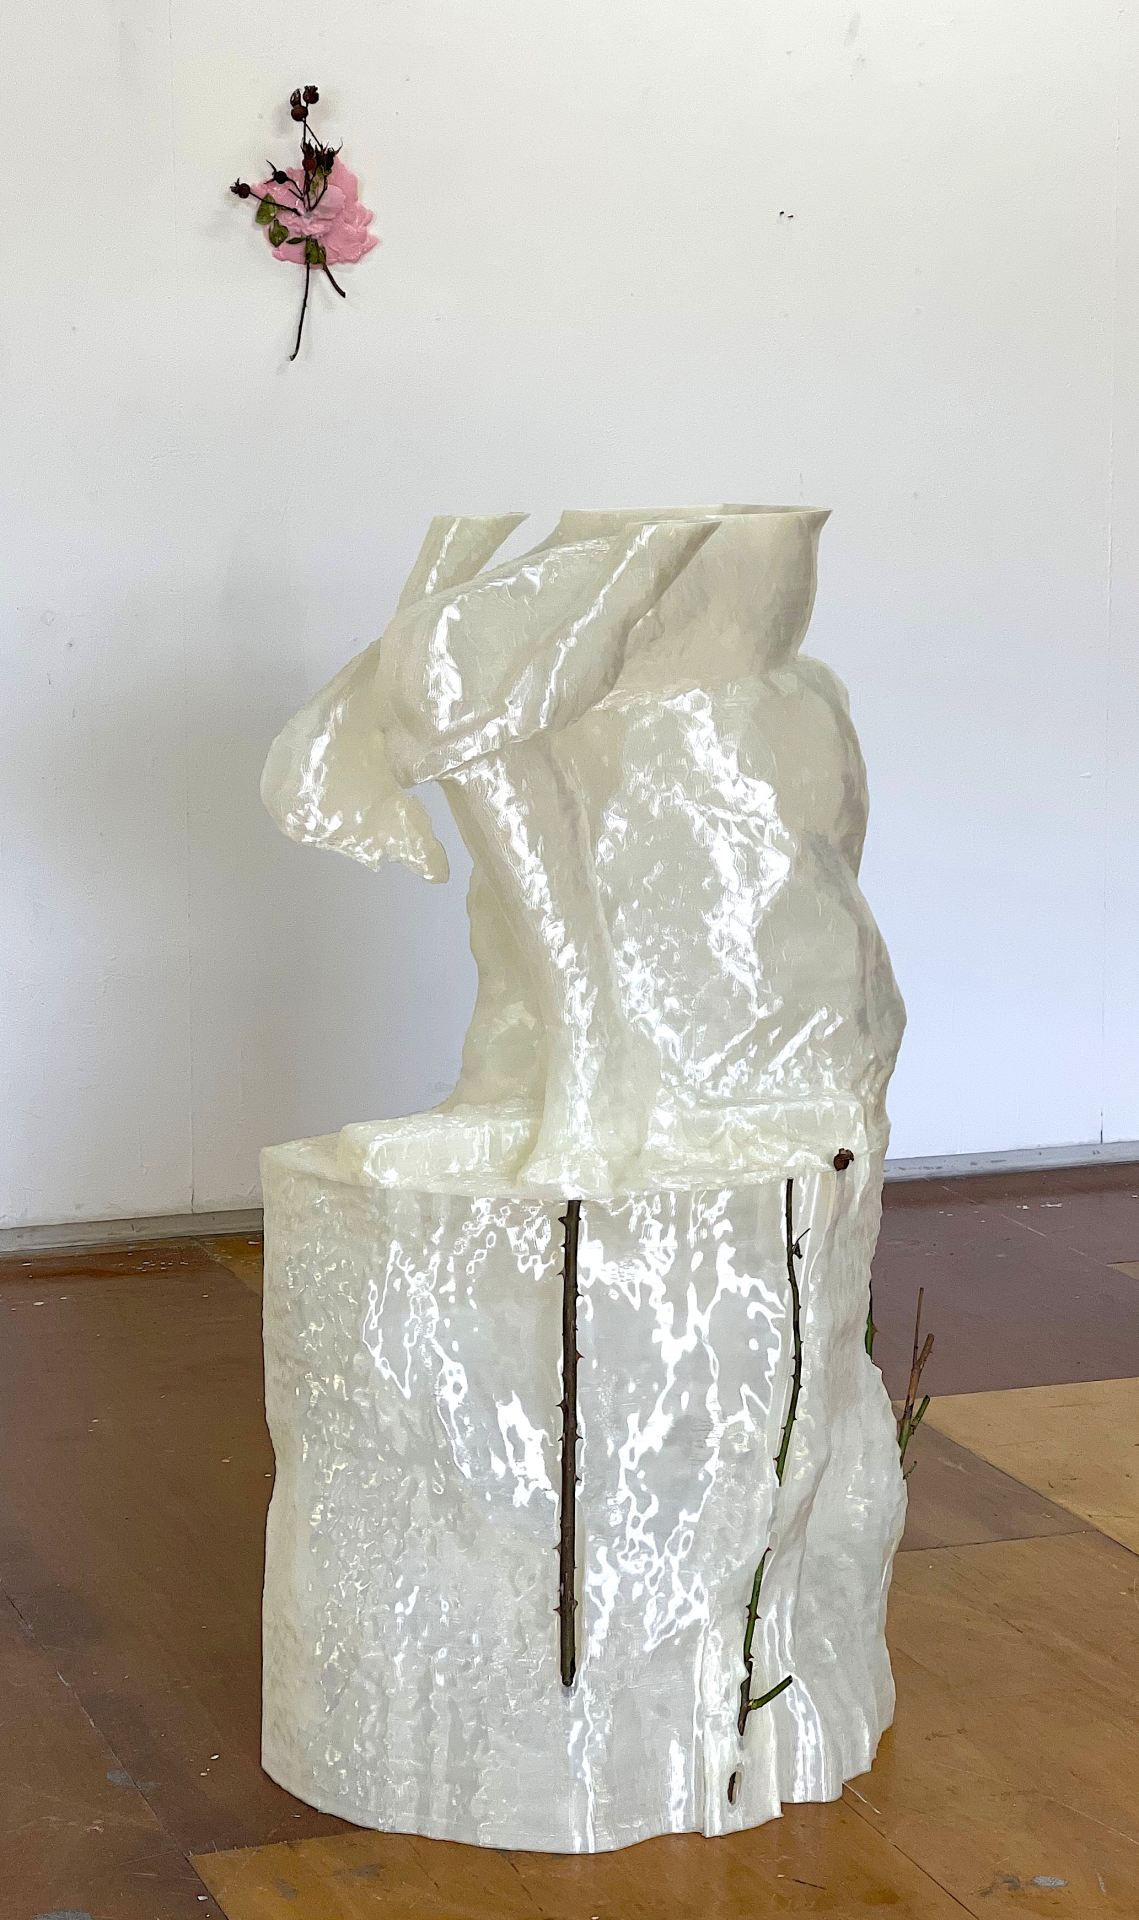 An image of a large, 3D printed sculpture.